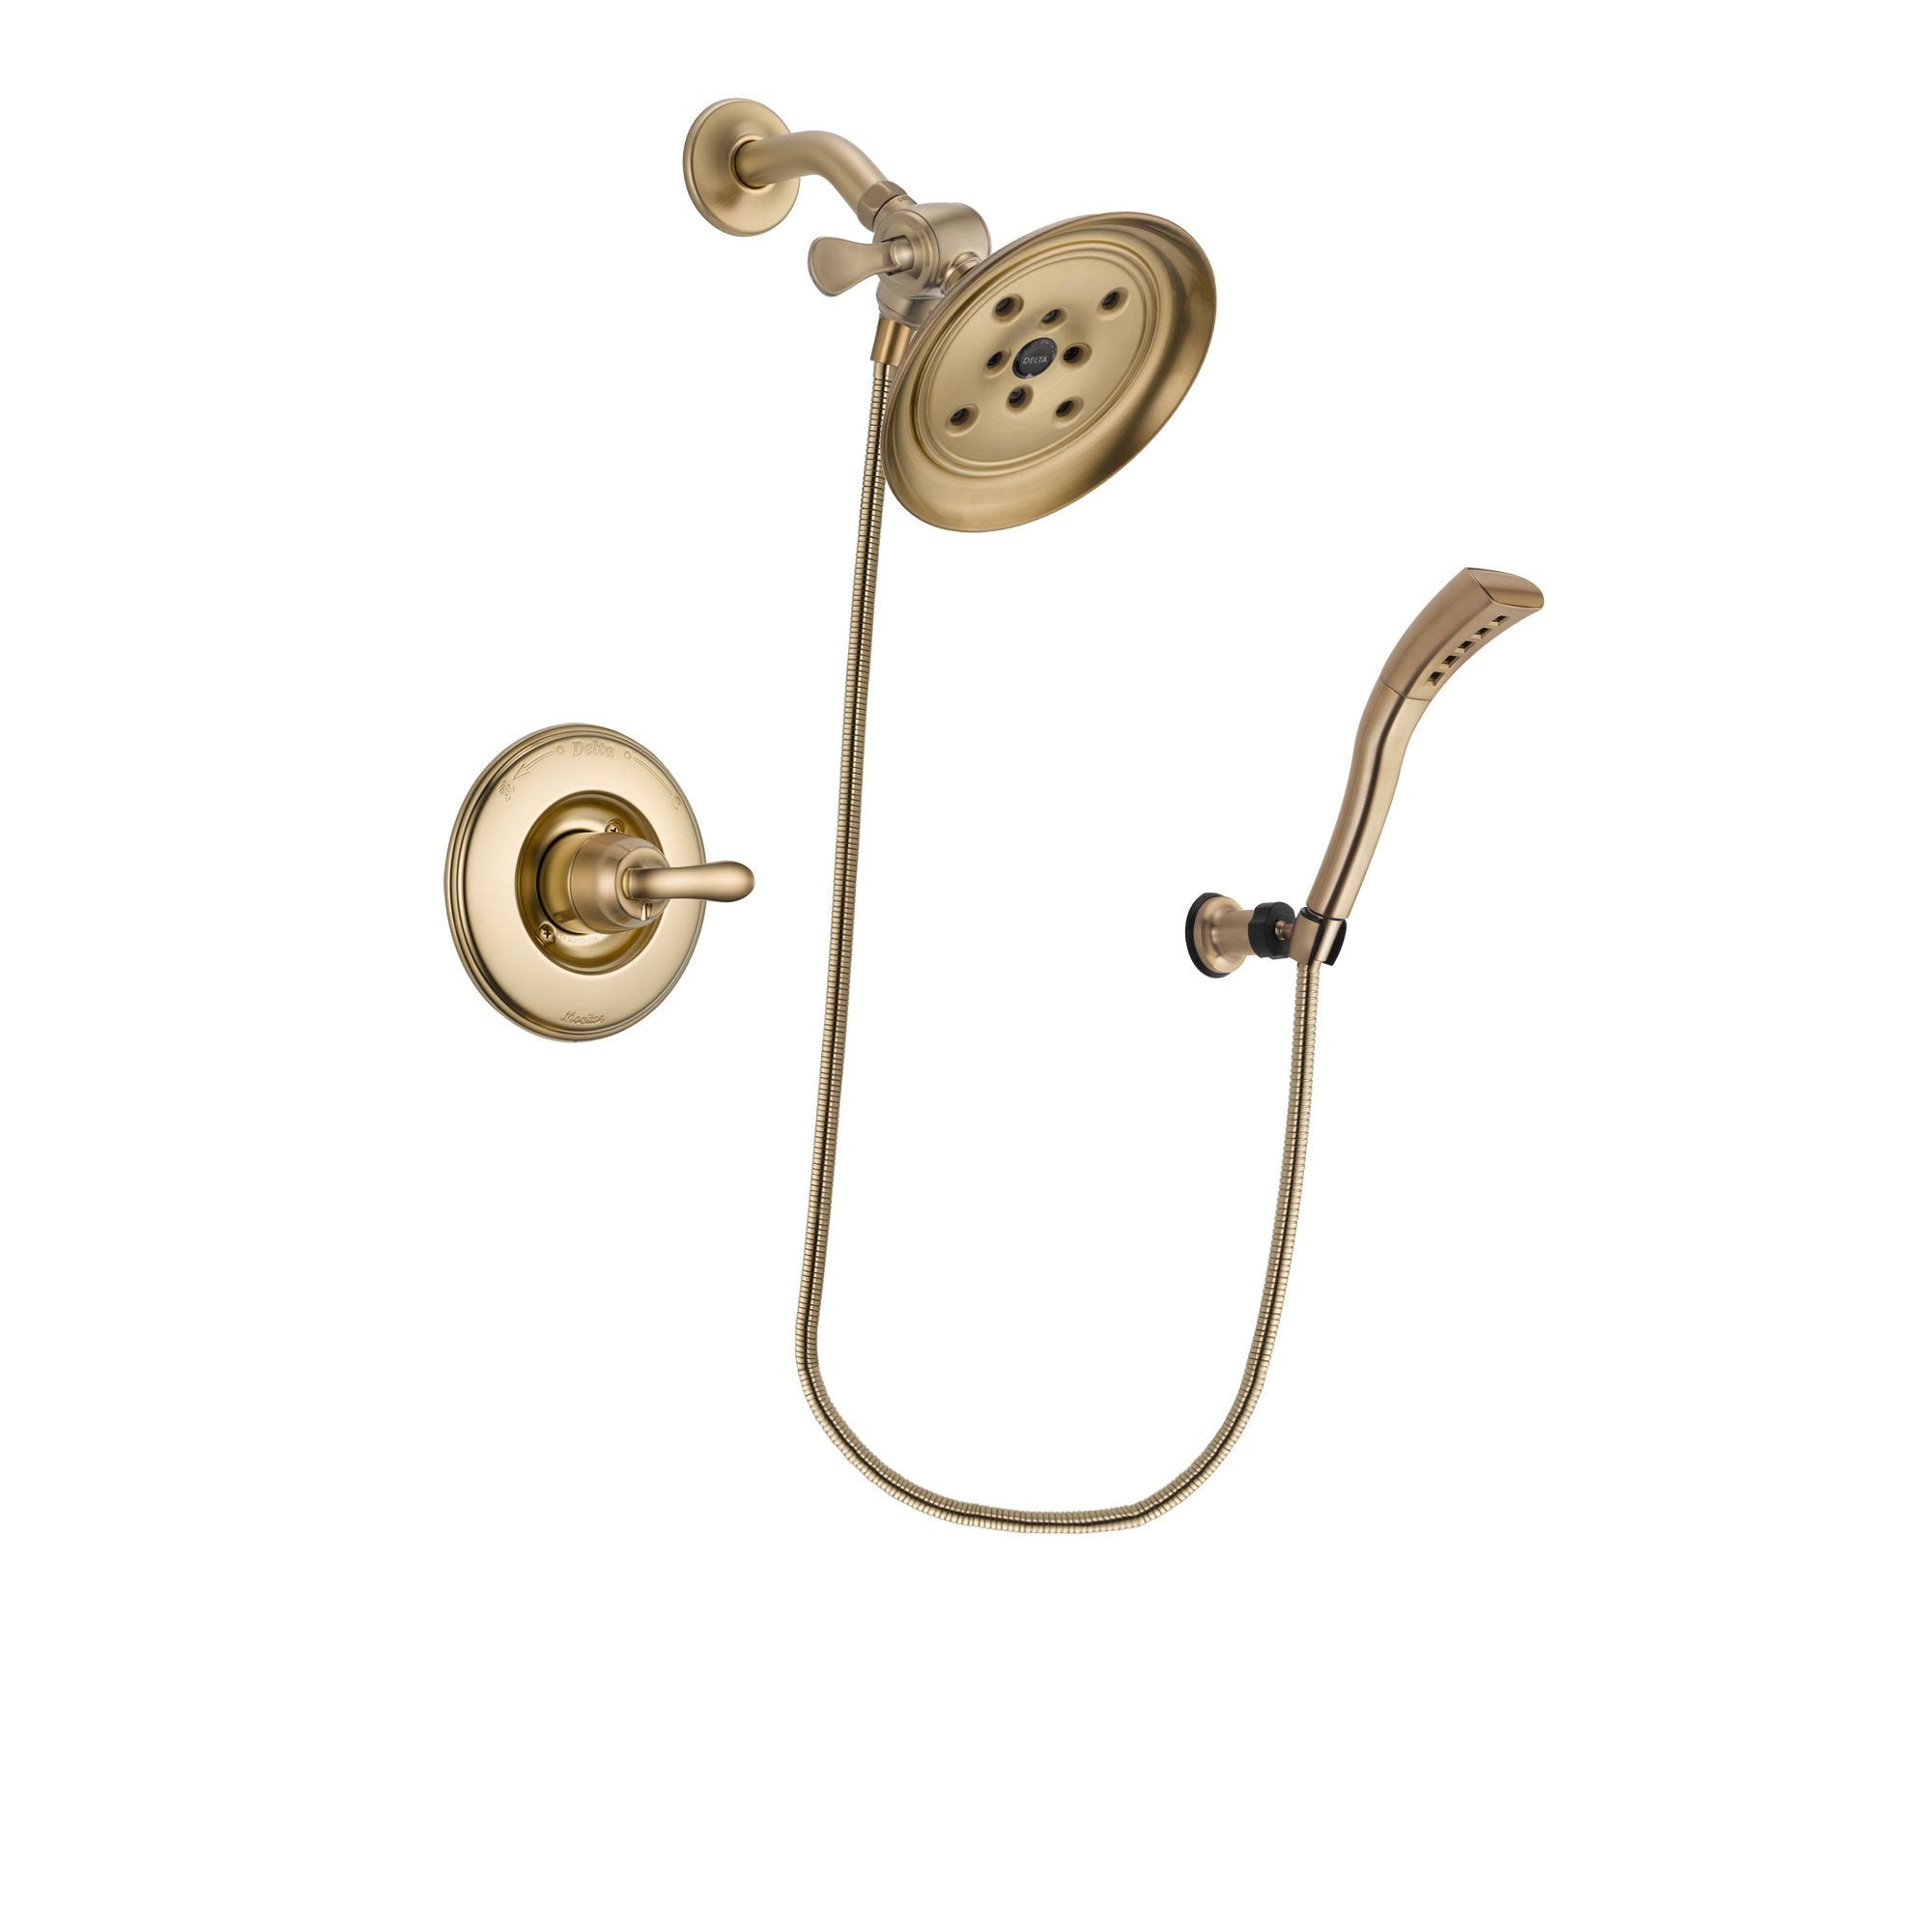 Delta Linden Champagne Bronze Finish Shower Faucet System Package with Large Rain Shower Head and Modern Wall Mount Personal Handheld Shower Spray Includes Rough-in Valve DSP3696V